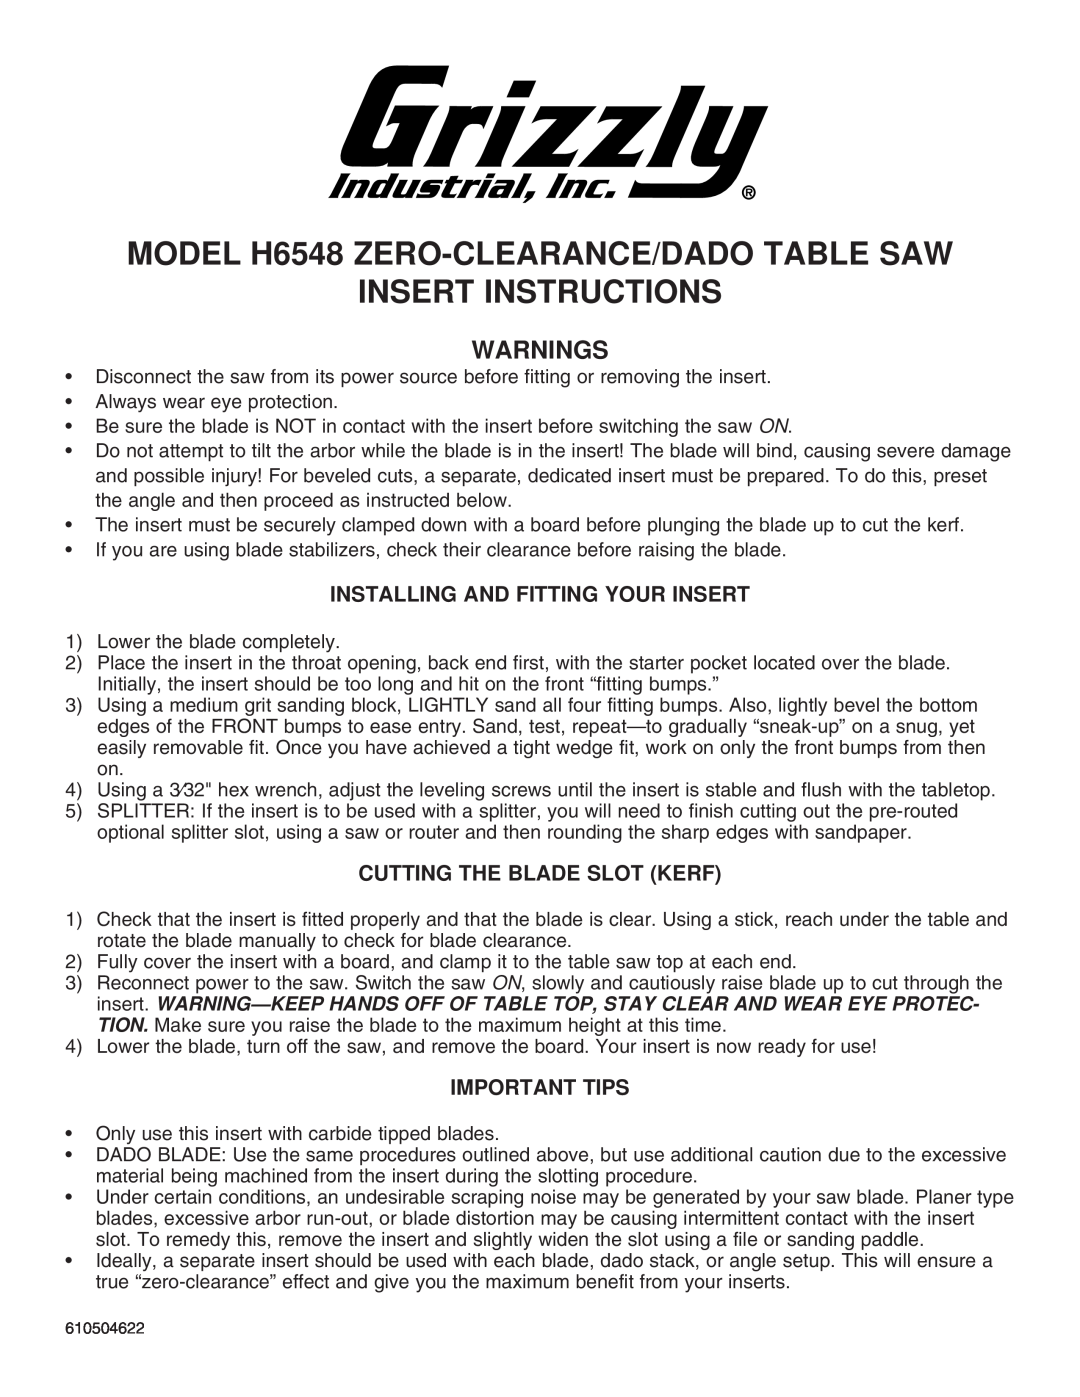 Grizzly manual MODEL H6548 ZERO-CLEARANCE/DADO TABLE SAW INSERT INSTRUCTIONS, Warnings, Cutting The Blade Slot Kerf 